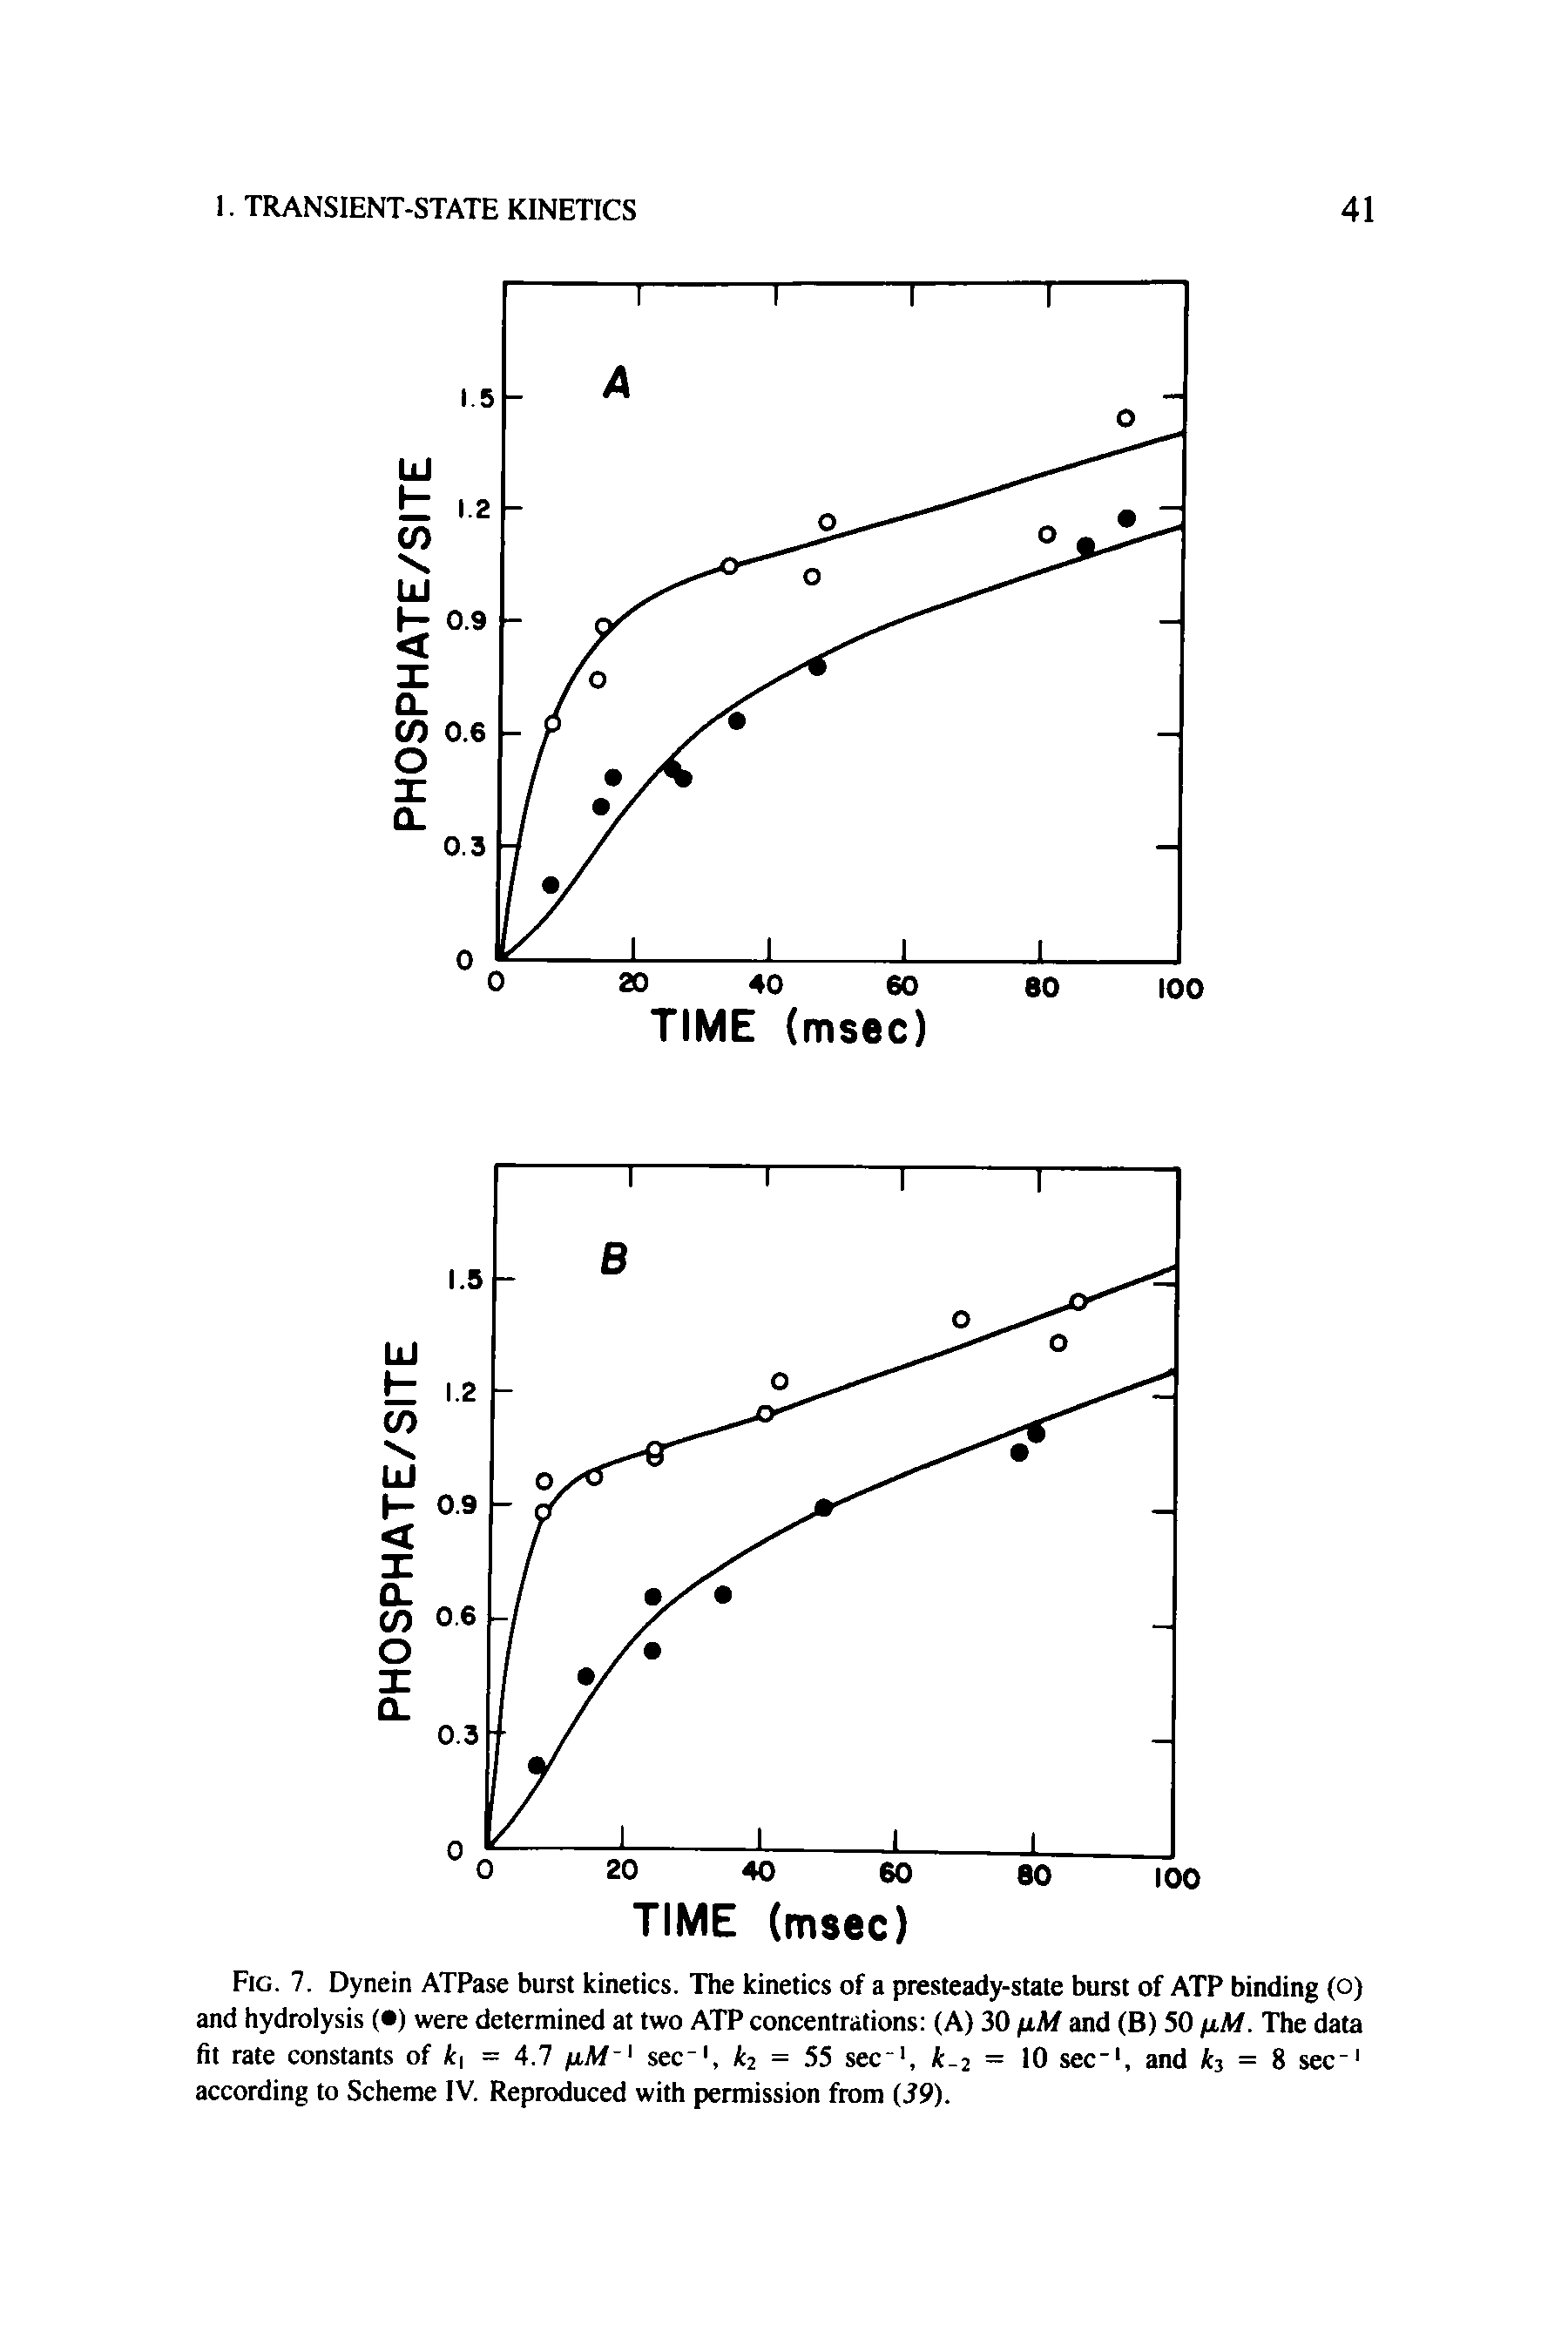 Fig. 7. Dynein ATPase burst kinetics. The kinetics of a presteady-state burst of ATP binding (o) and hydrolysis ( ) were determined at two ATP concentrations (A) 30 and (B) 50 /xAf. The data fit rate constants of k = 4.7 juAf sec", ki = 55 sec, k-2 = 10 see", and ks = 8 see" according to Scheme IV. Reproduced with permission from (J9).